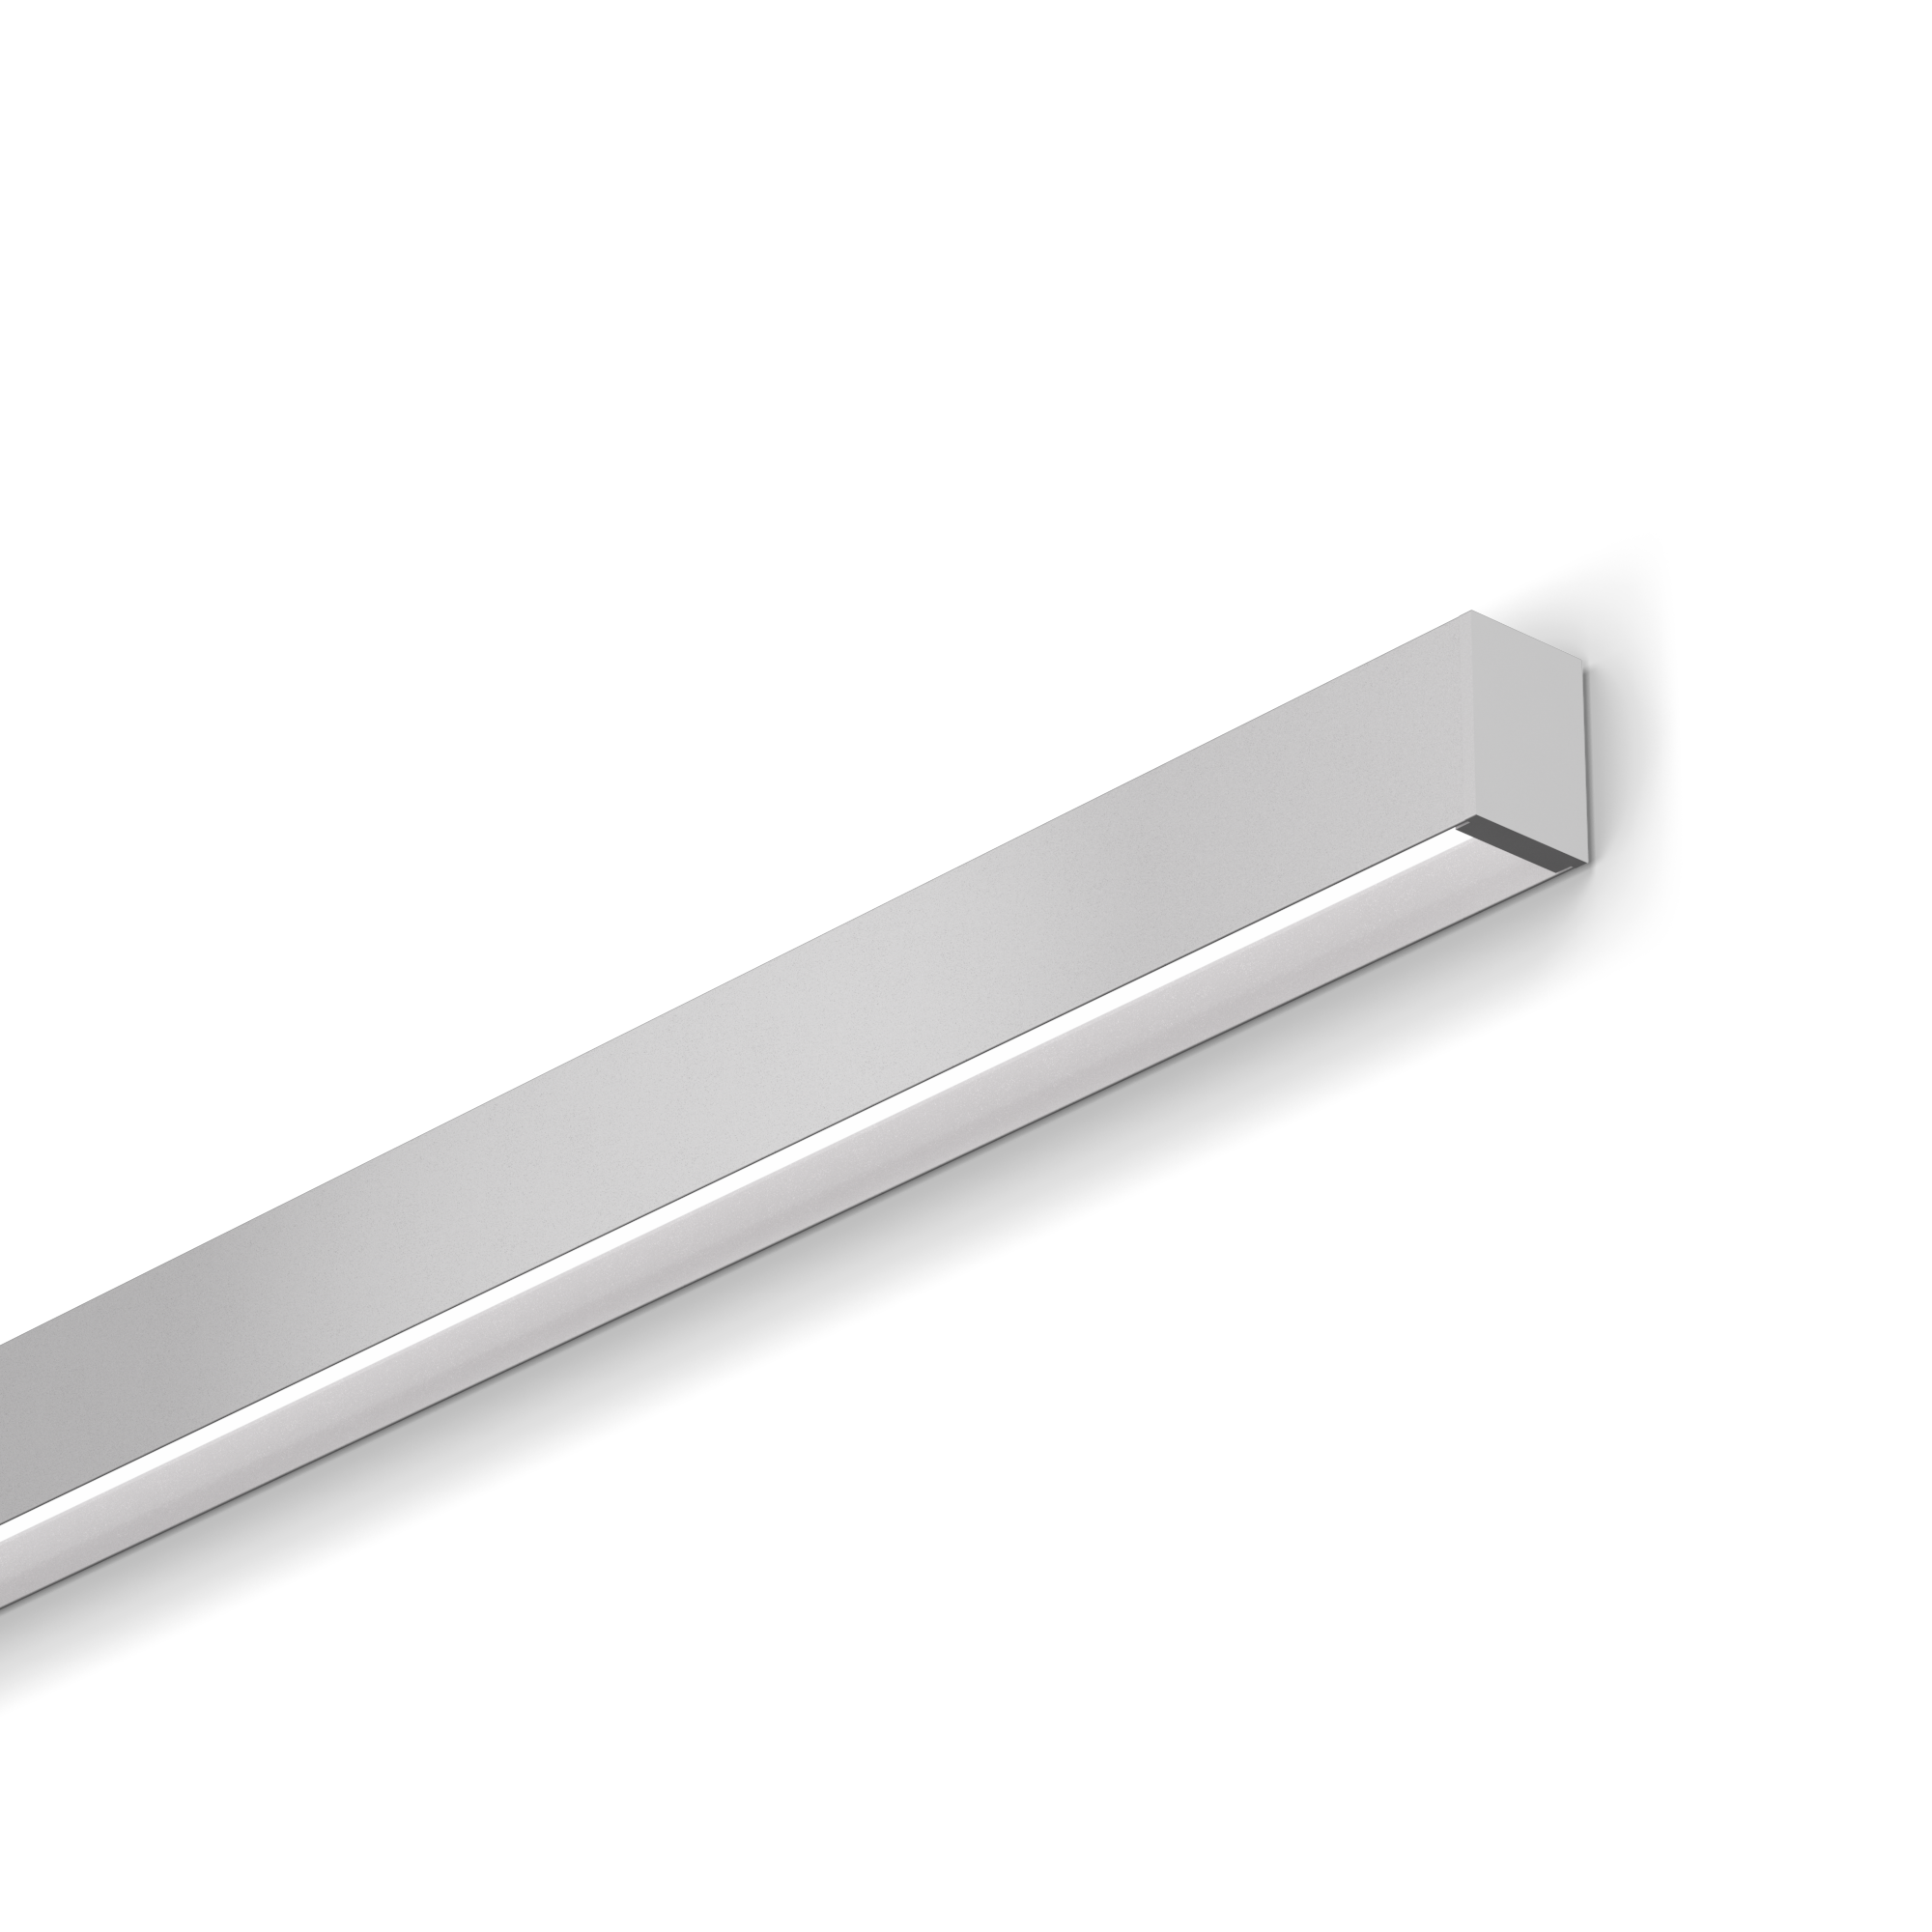 0.95” Ultra-Compact LED Linear
NANOBeam is 0.95” wide, bringing regressed SmartBeam® capabilities to a wall-mounted form that compliments architectural space. NANOBeam features a remote driver to remove visual bulk.

 

Beam profile: 0.95” (24mm) x 1.38” (35mm)